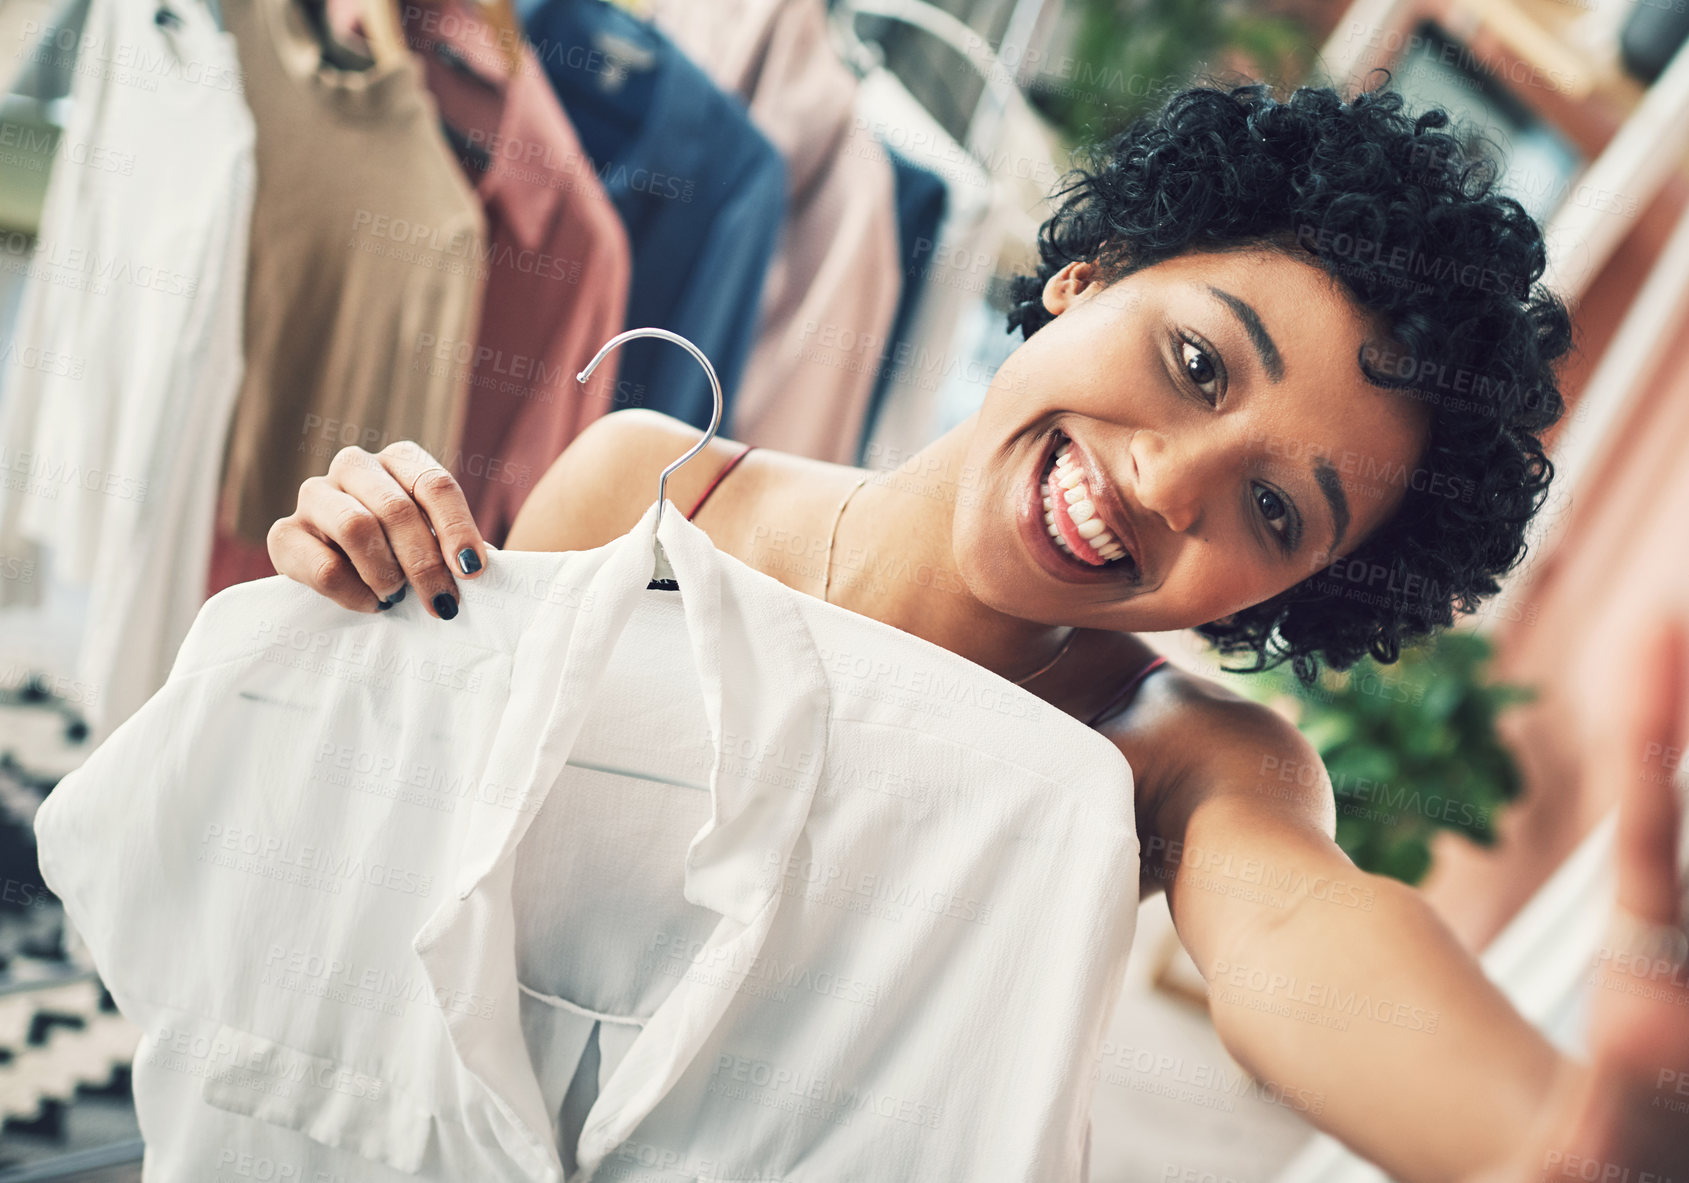 Buy stock photo Cropped shot of a woman holding up a shirt towards the camera